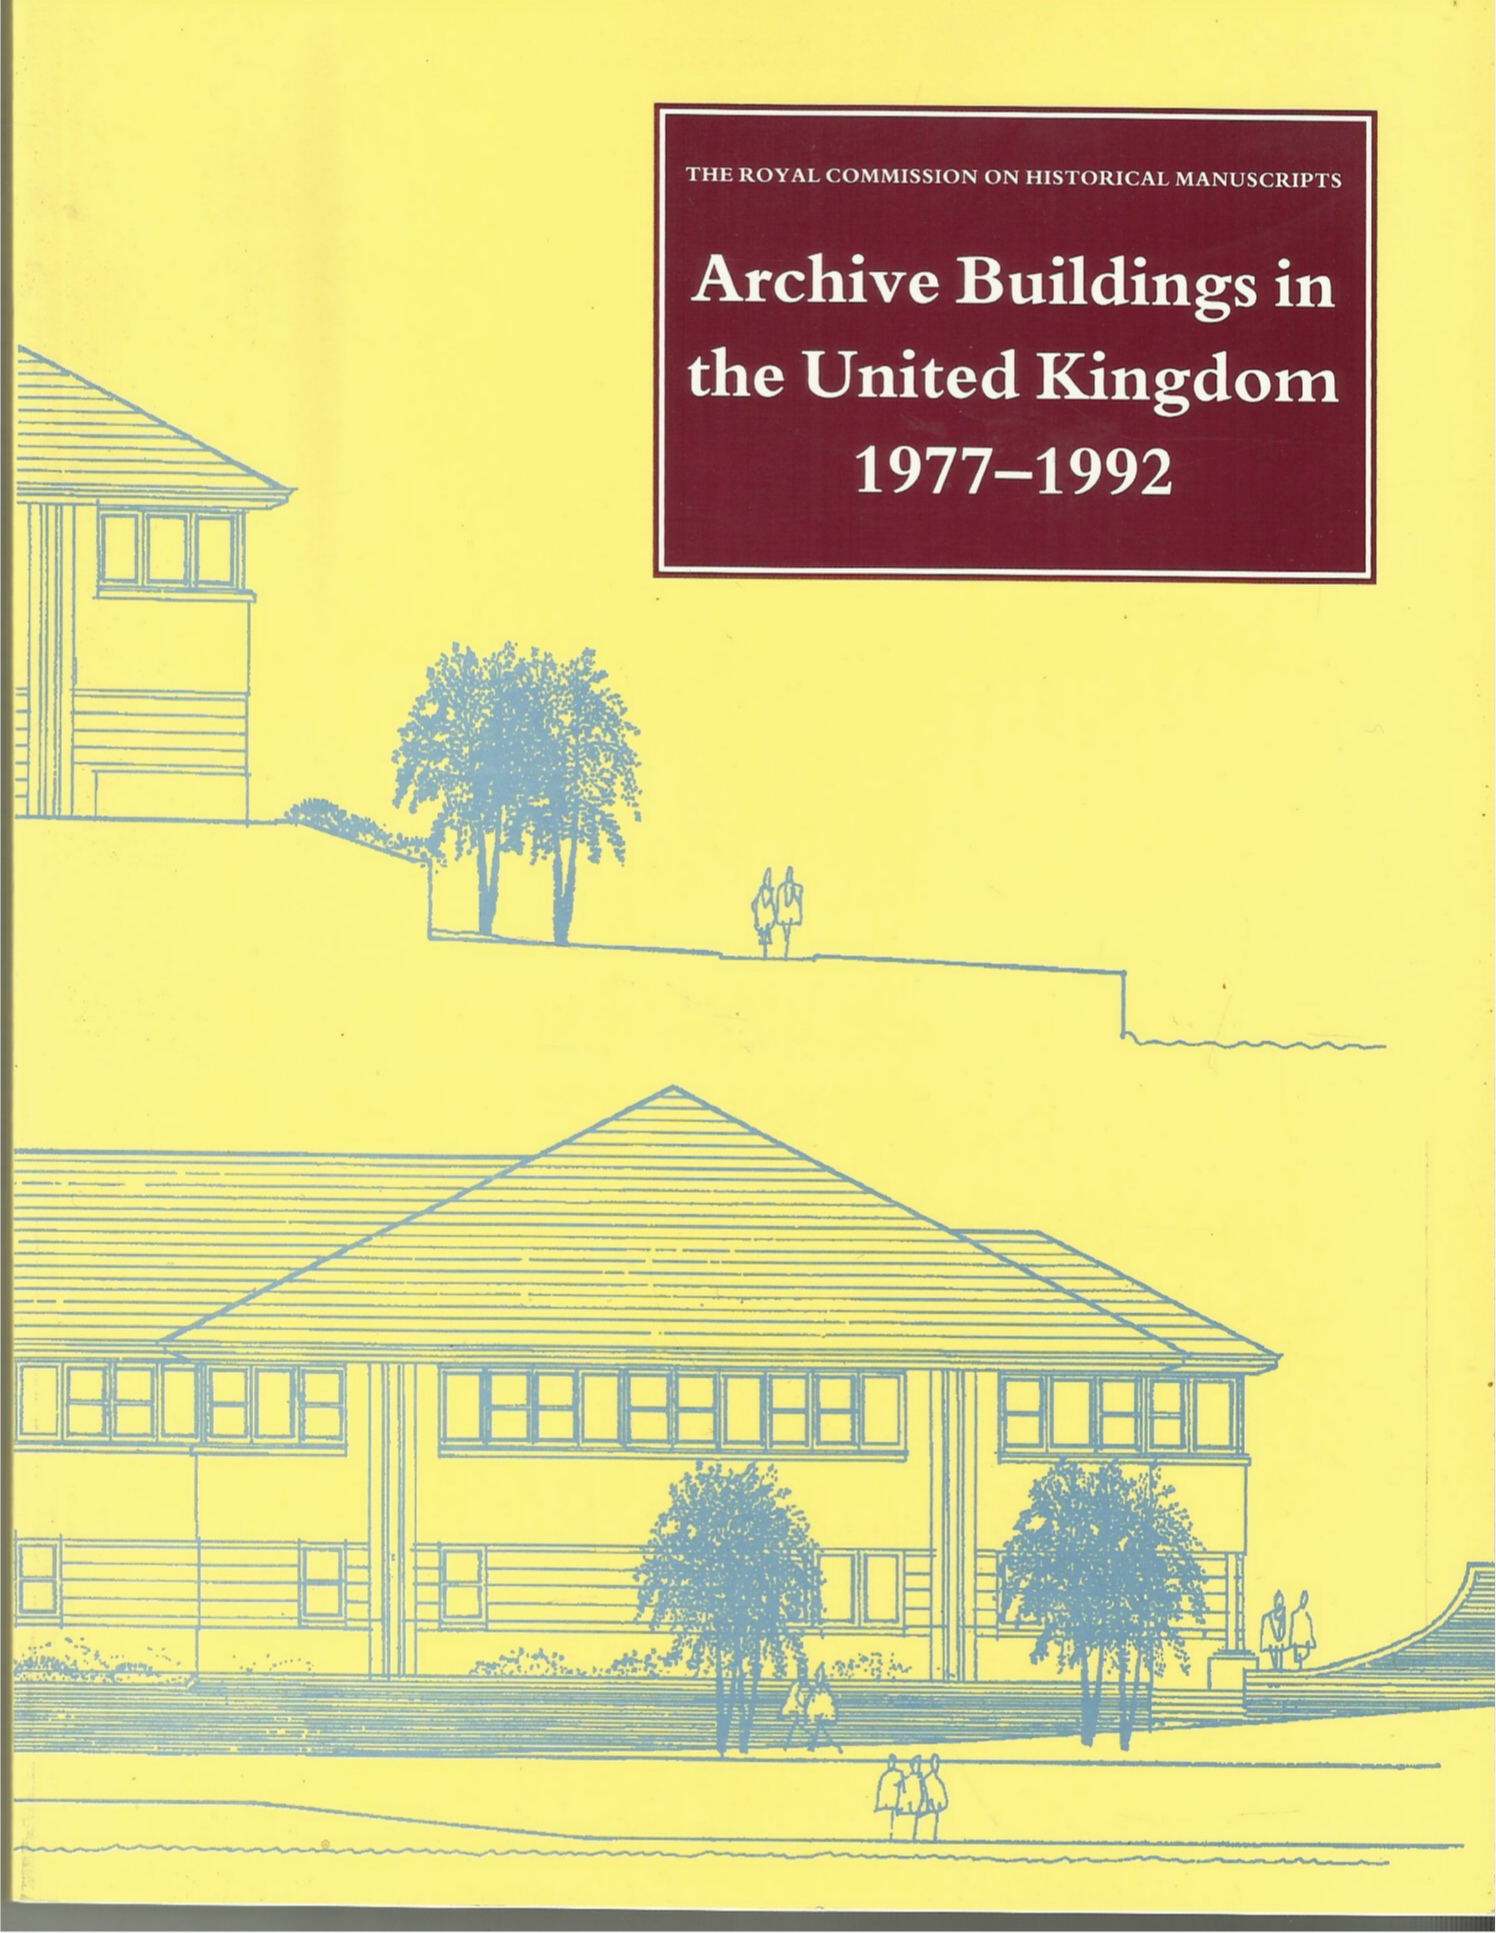 HISTORICAL MANUSCRIPT COMMISSION - Archive Buildings in the United Kingdom 1977-1992